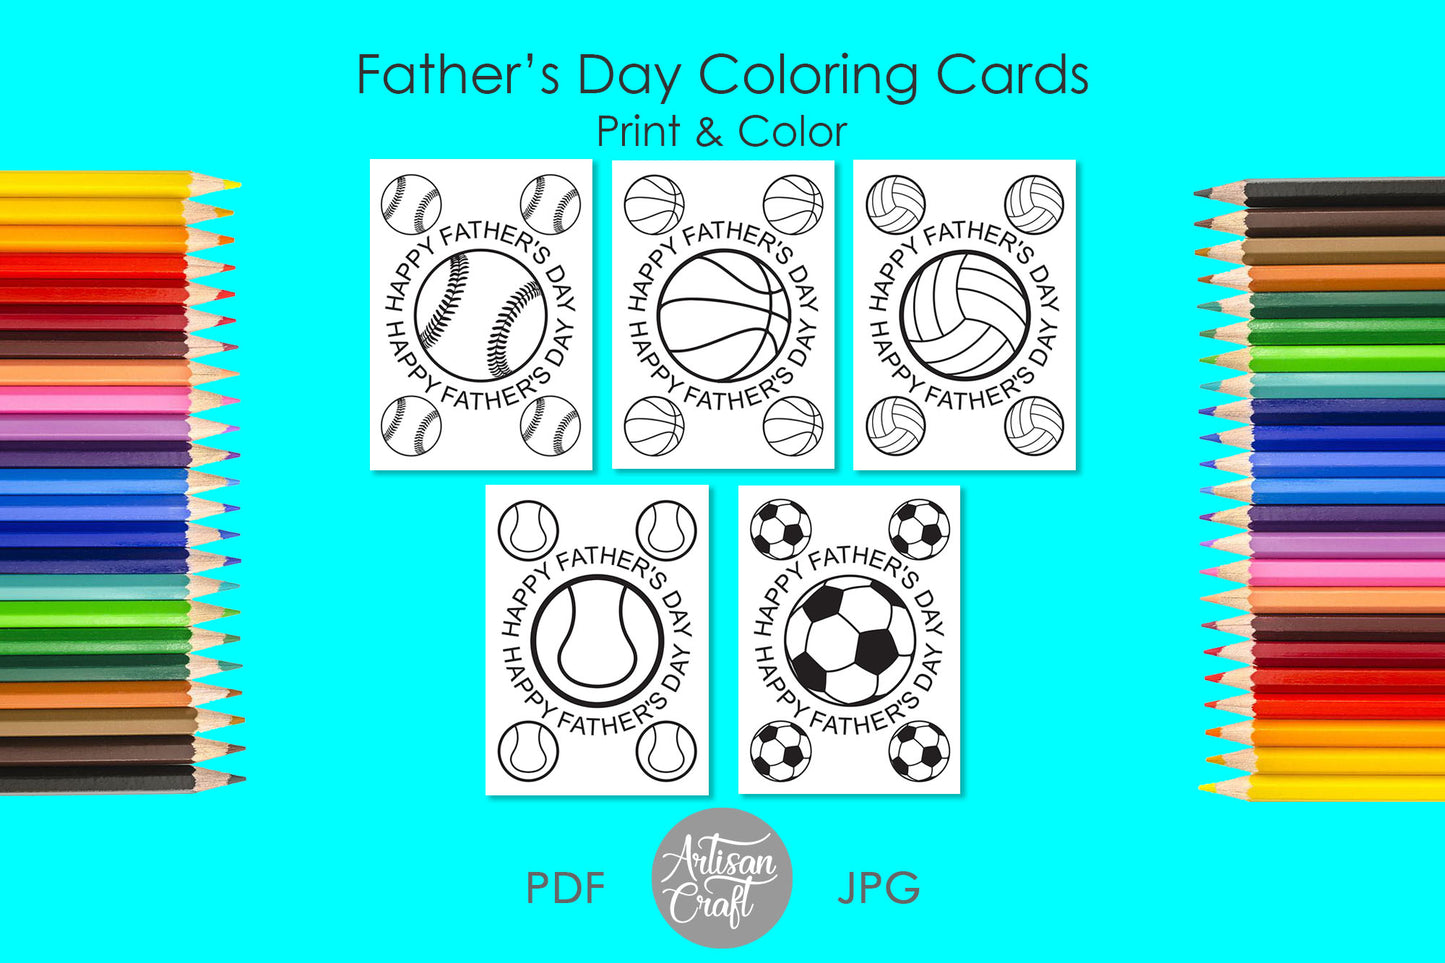 Fathers Day coloring card